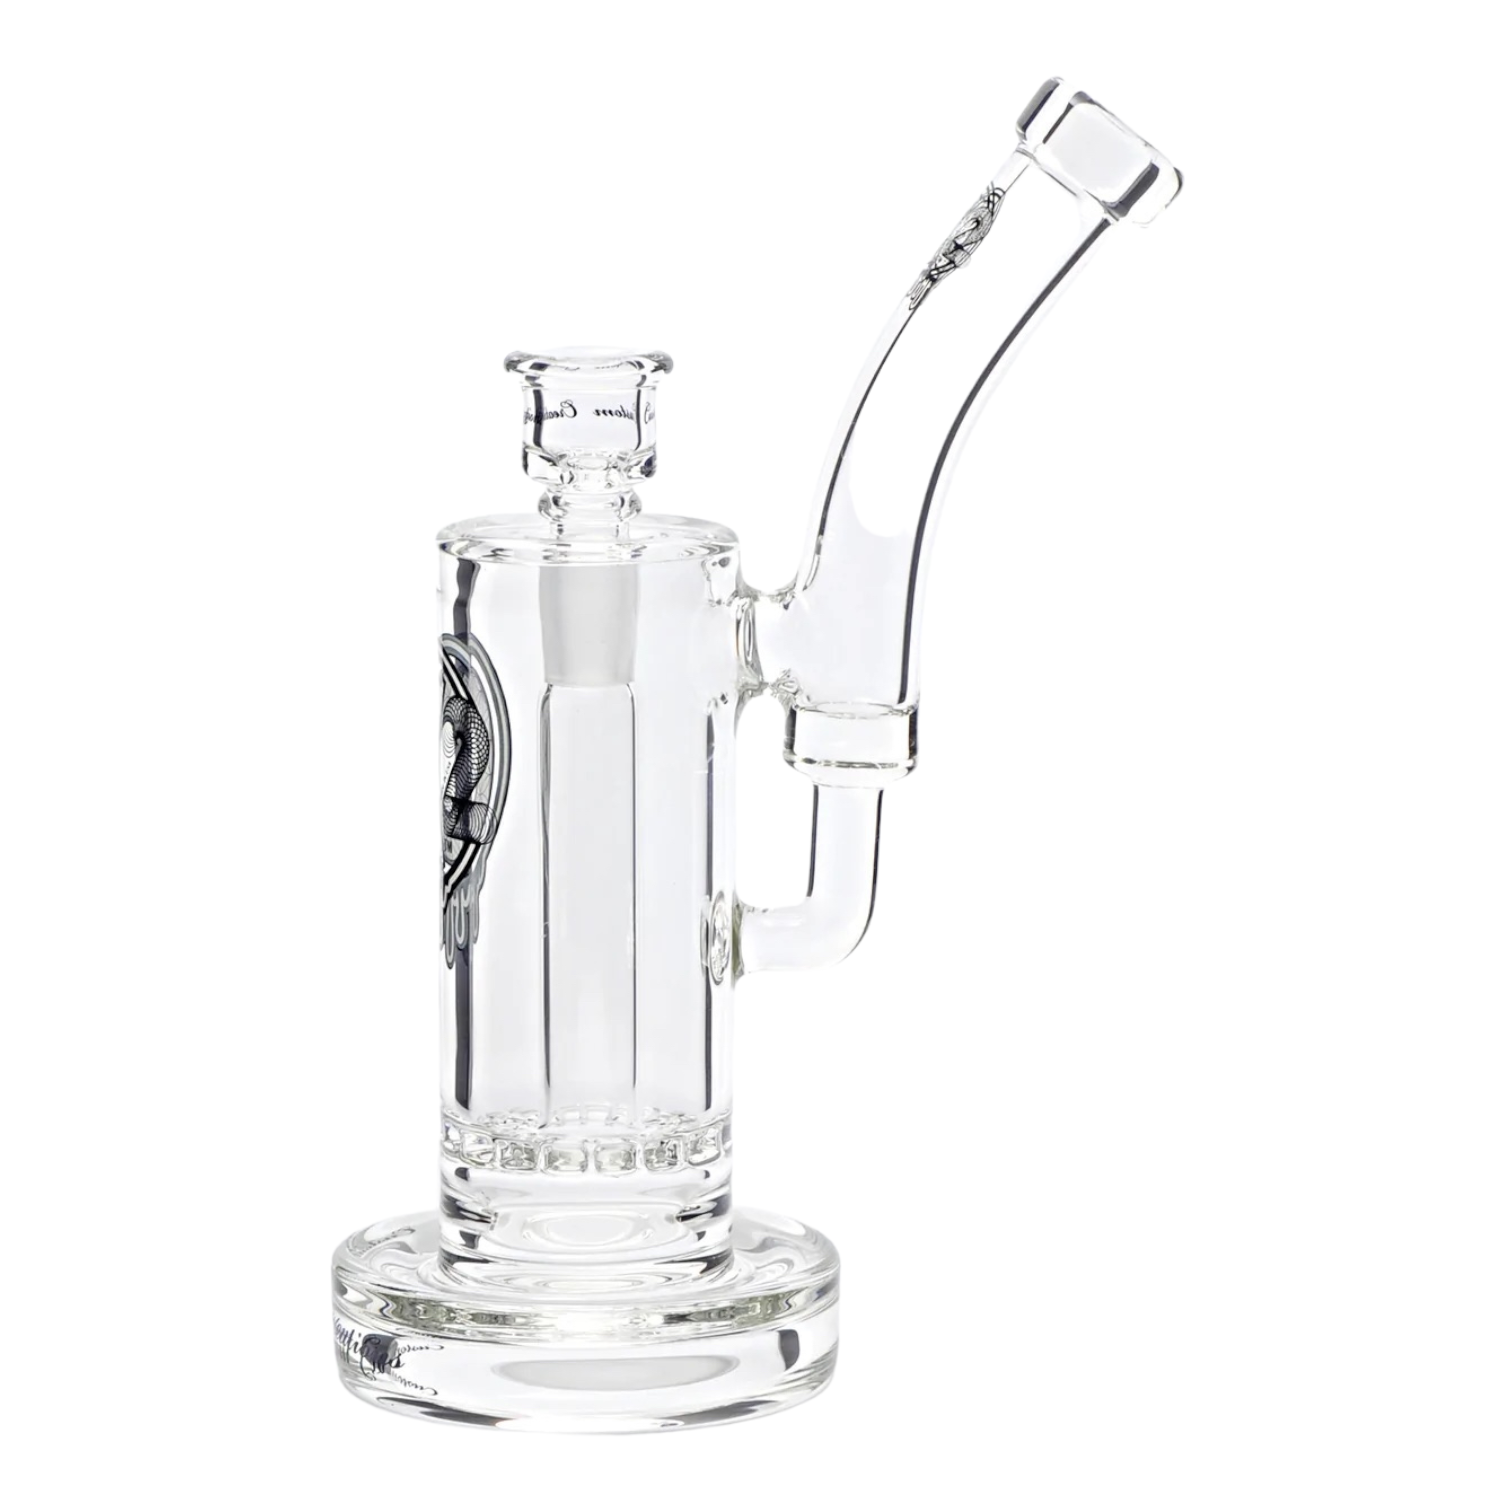 Single Ratchet Perc Tall Clear Bubbler Water Pipe Made By C2 Custom Creations 